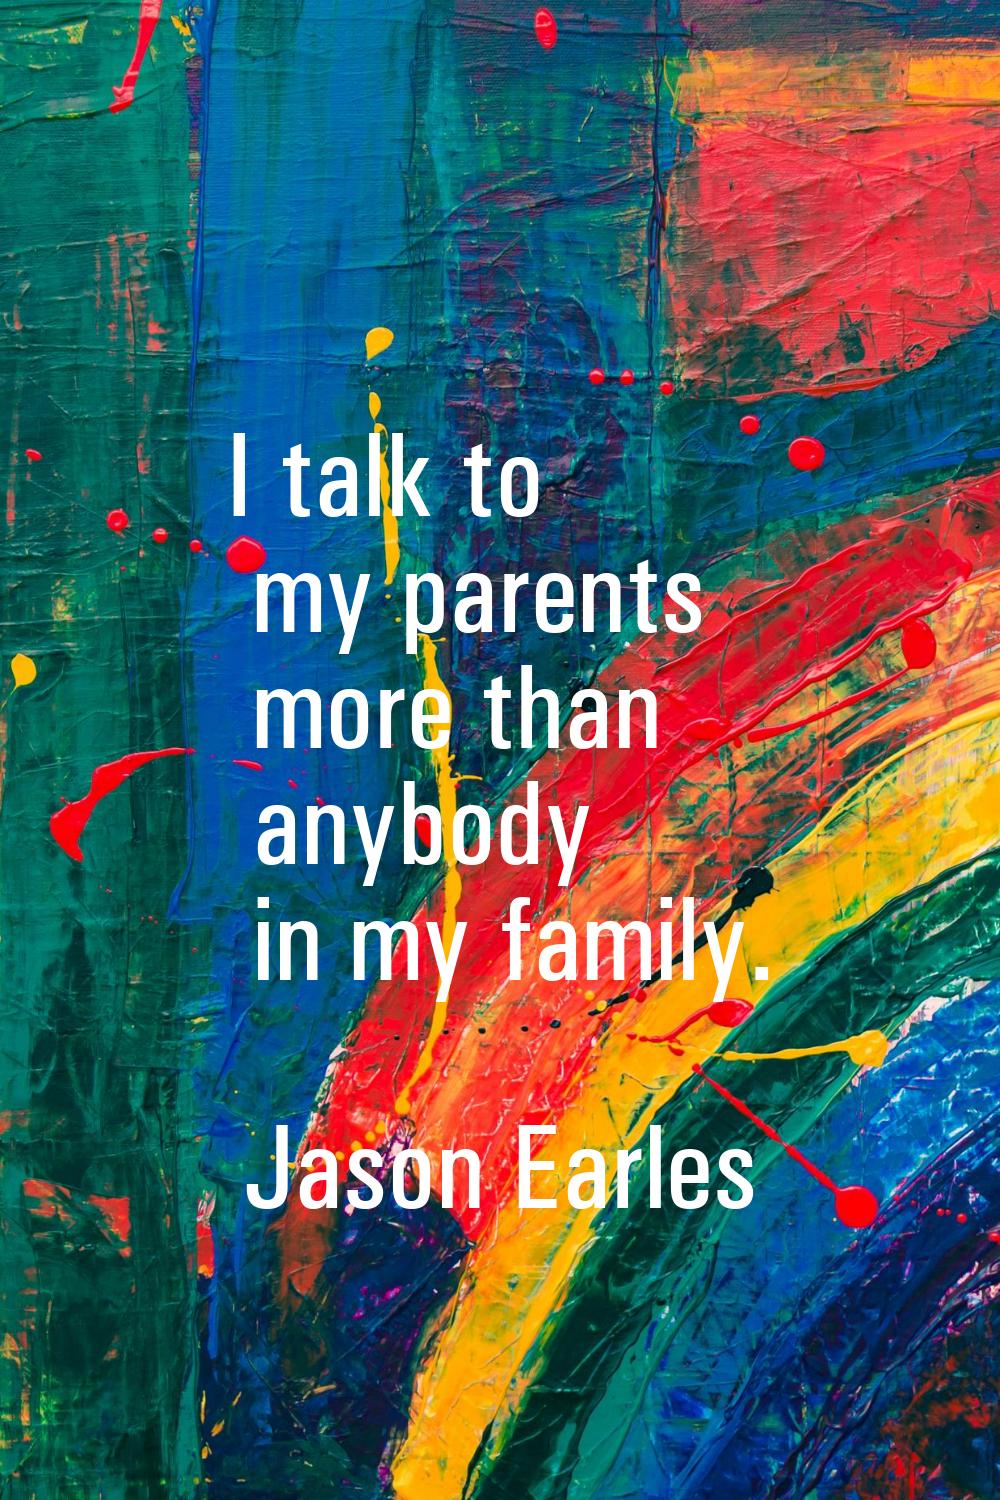 I talk to my parents more than anybody in my family.